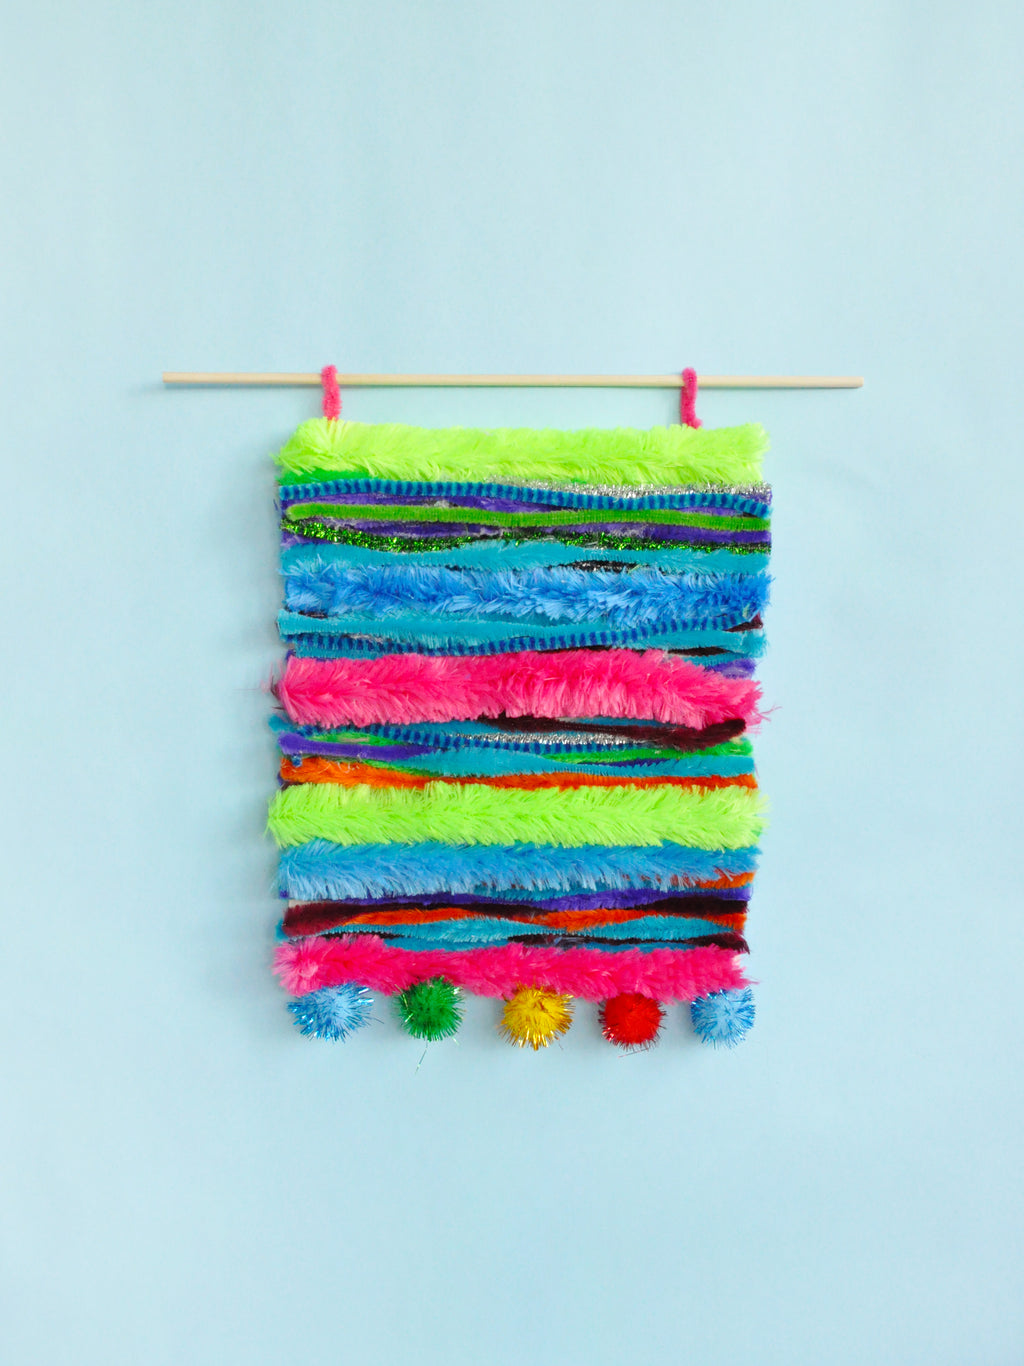 No Weave Wall Hanging